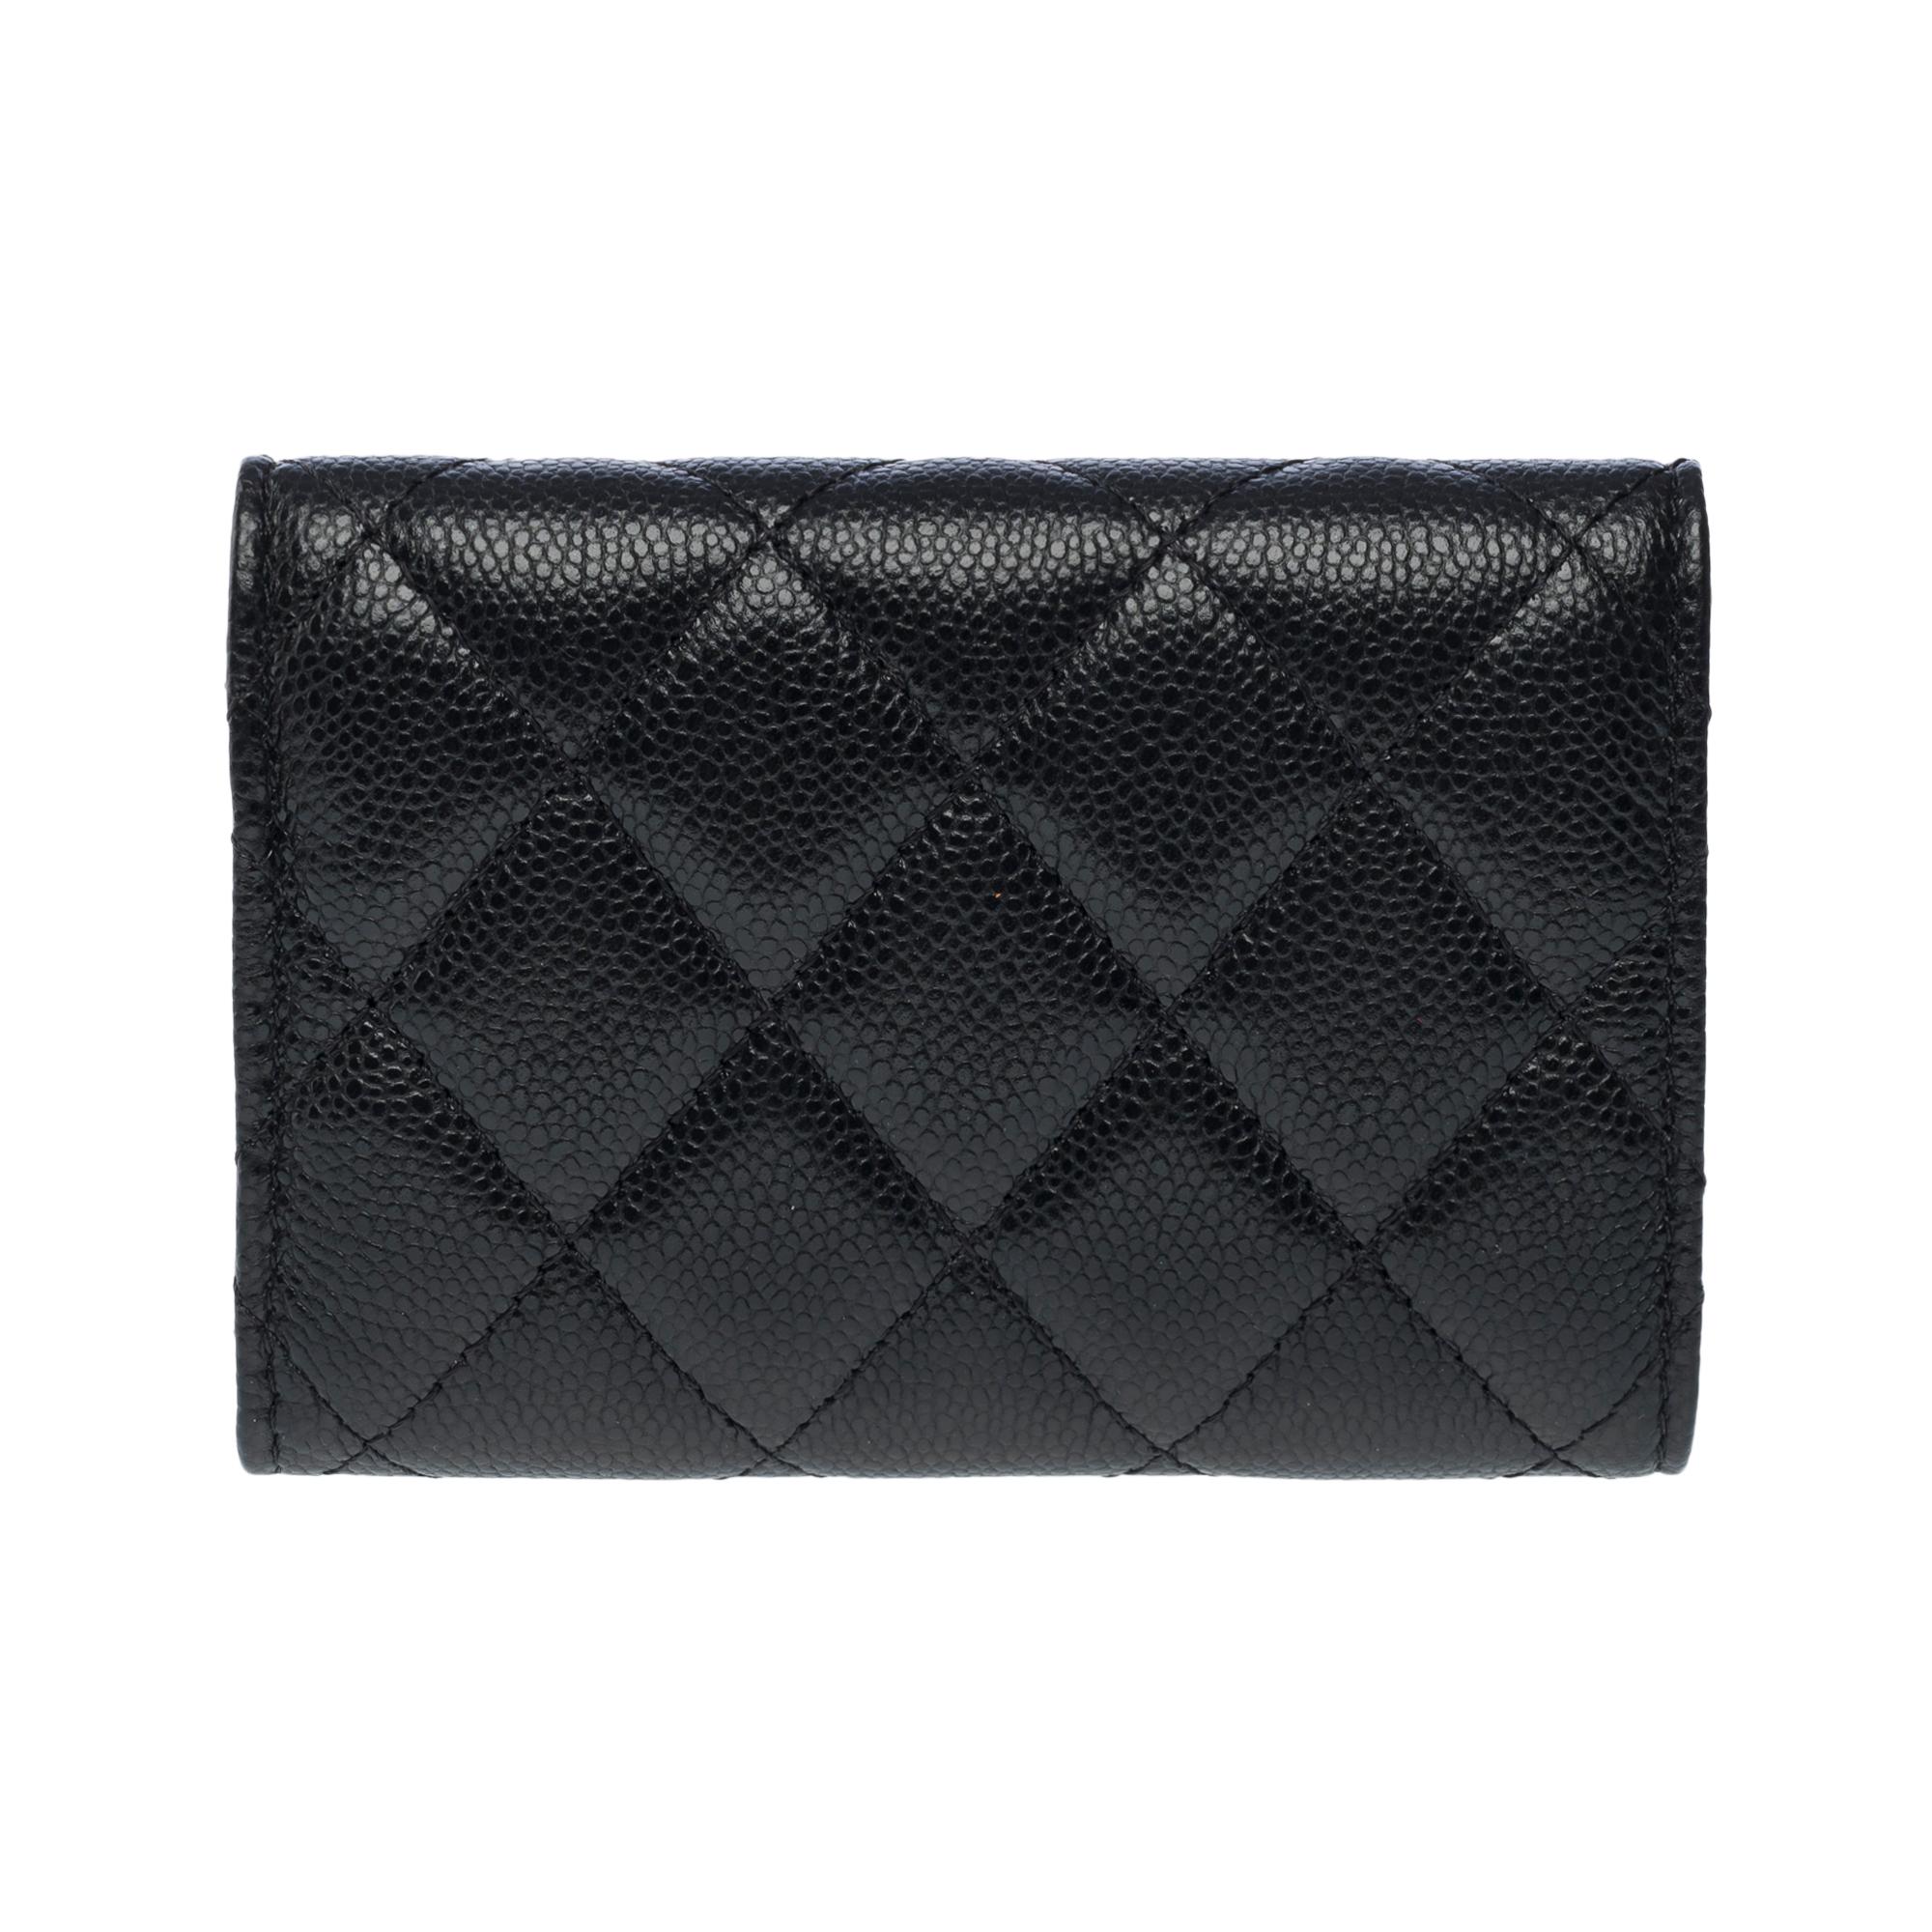 Women's Gorgeous Chanel Wallet  in black Caviar quilted leather, GHW